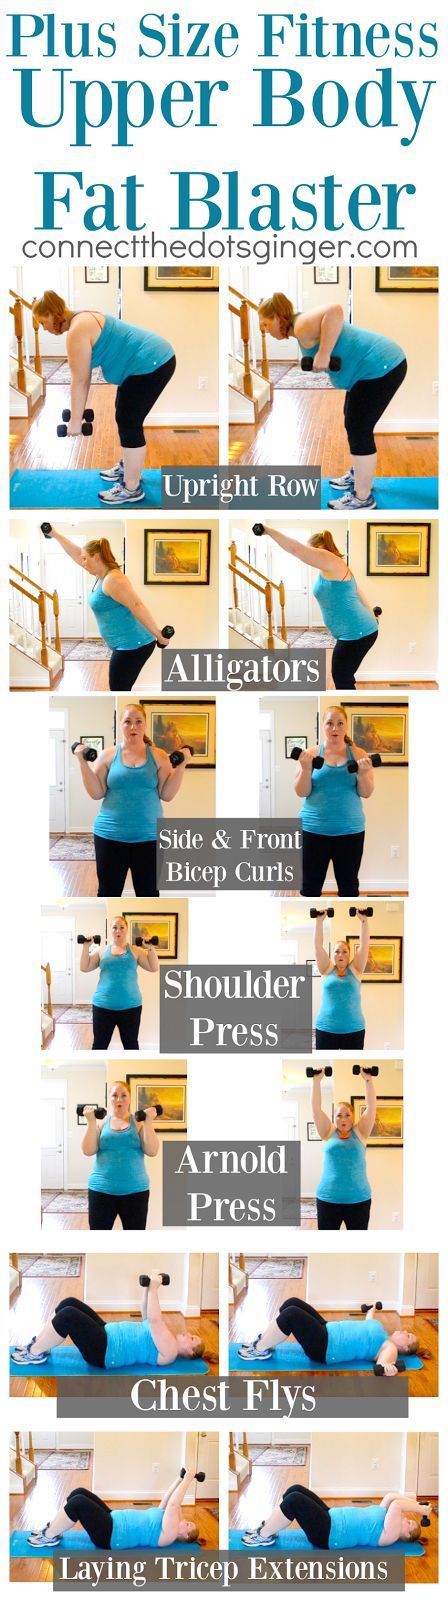 PLUS SIZE FITNESS | Upper Body, Fat Blasting, Workout | At Home Exercise | Moms | beginner workouts